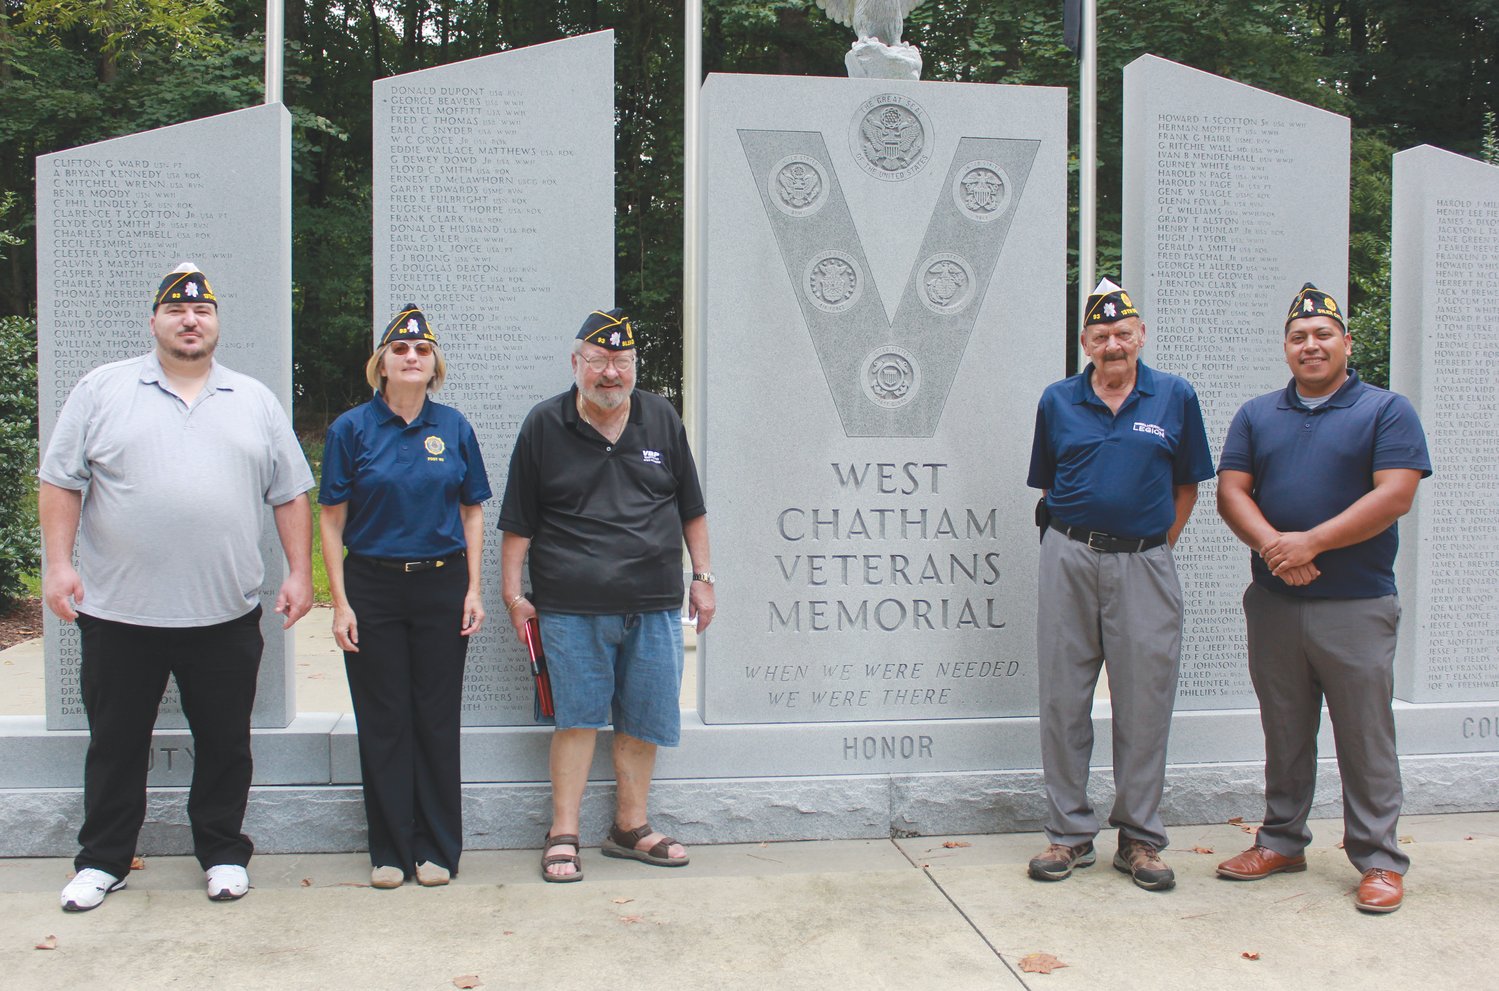 Members of the American Legion Post 93, including Vice Commander Scott Busenlehner (far left) and Commander Carin O’Brien (second from left), pose for a group portrait next to the West Chatham Veterans Memorial at Bray Park in Siler City. This year, Post 93 will be celebrating its 100th anniversary as an organization for veterans.